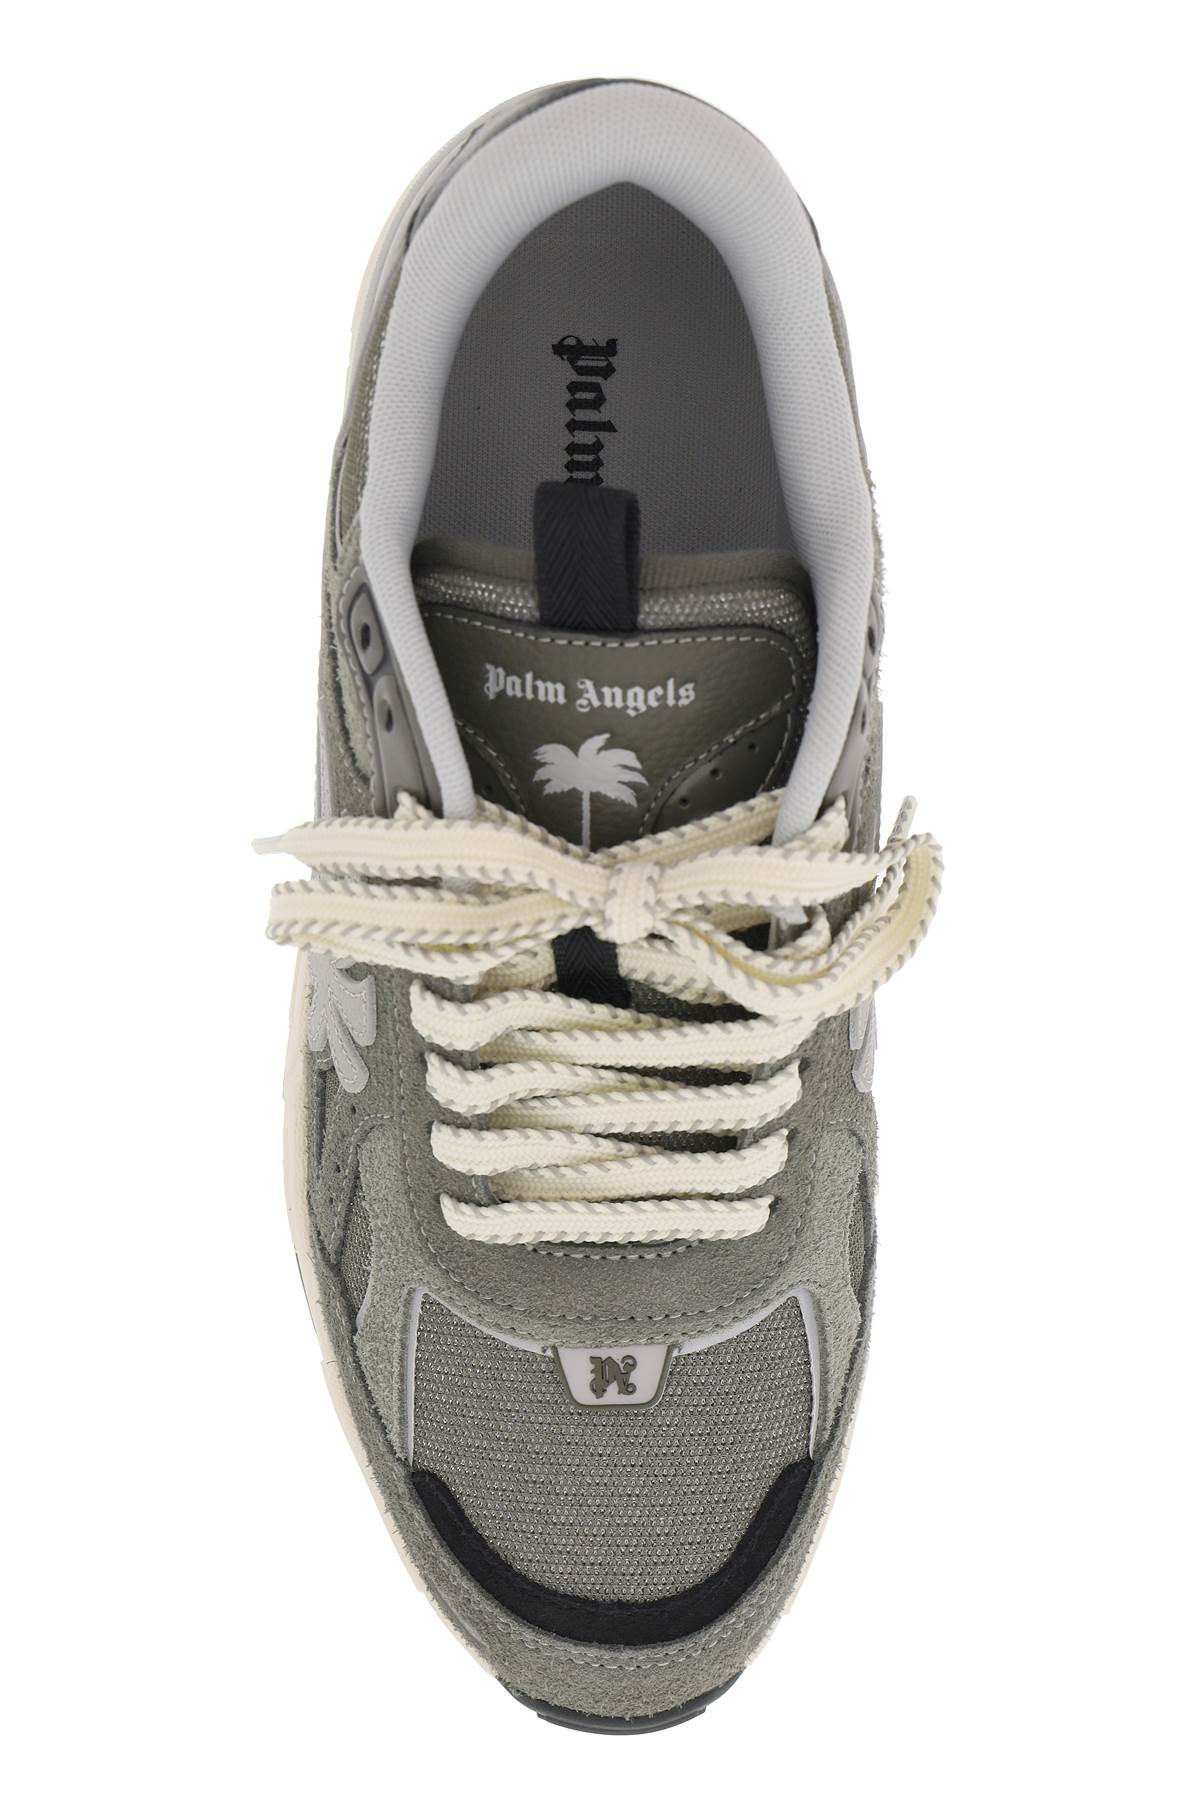 Palm angels palm runner sneakers for-1